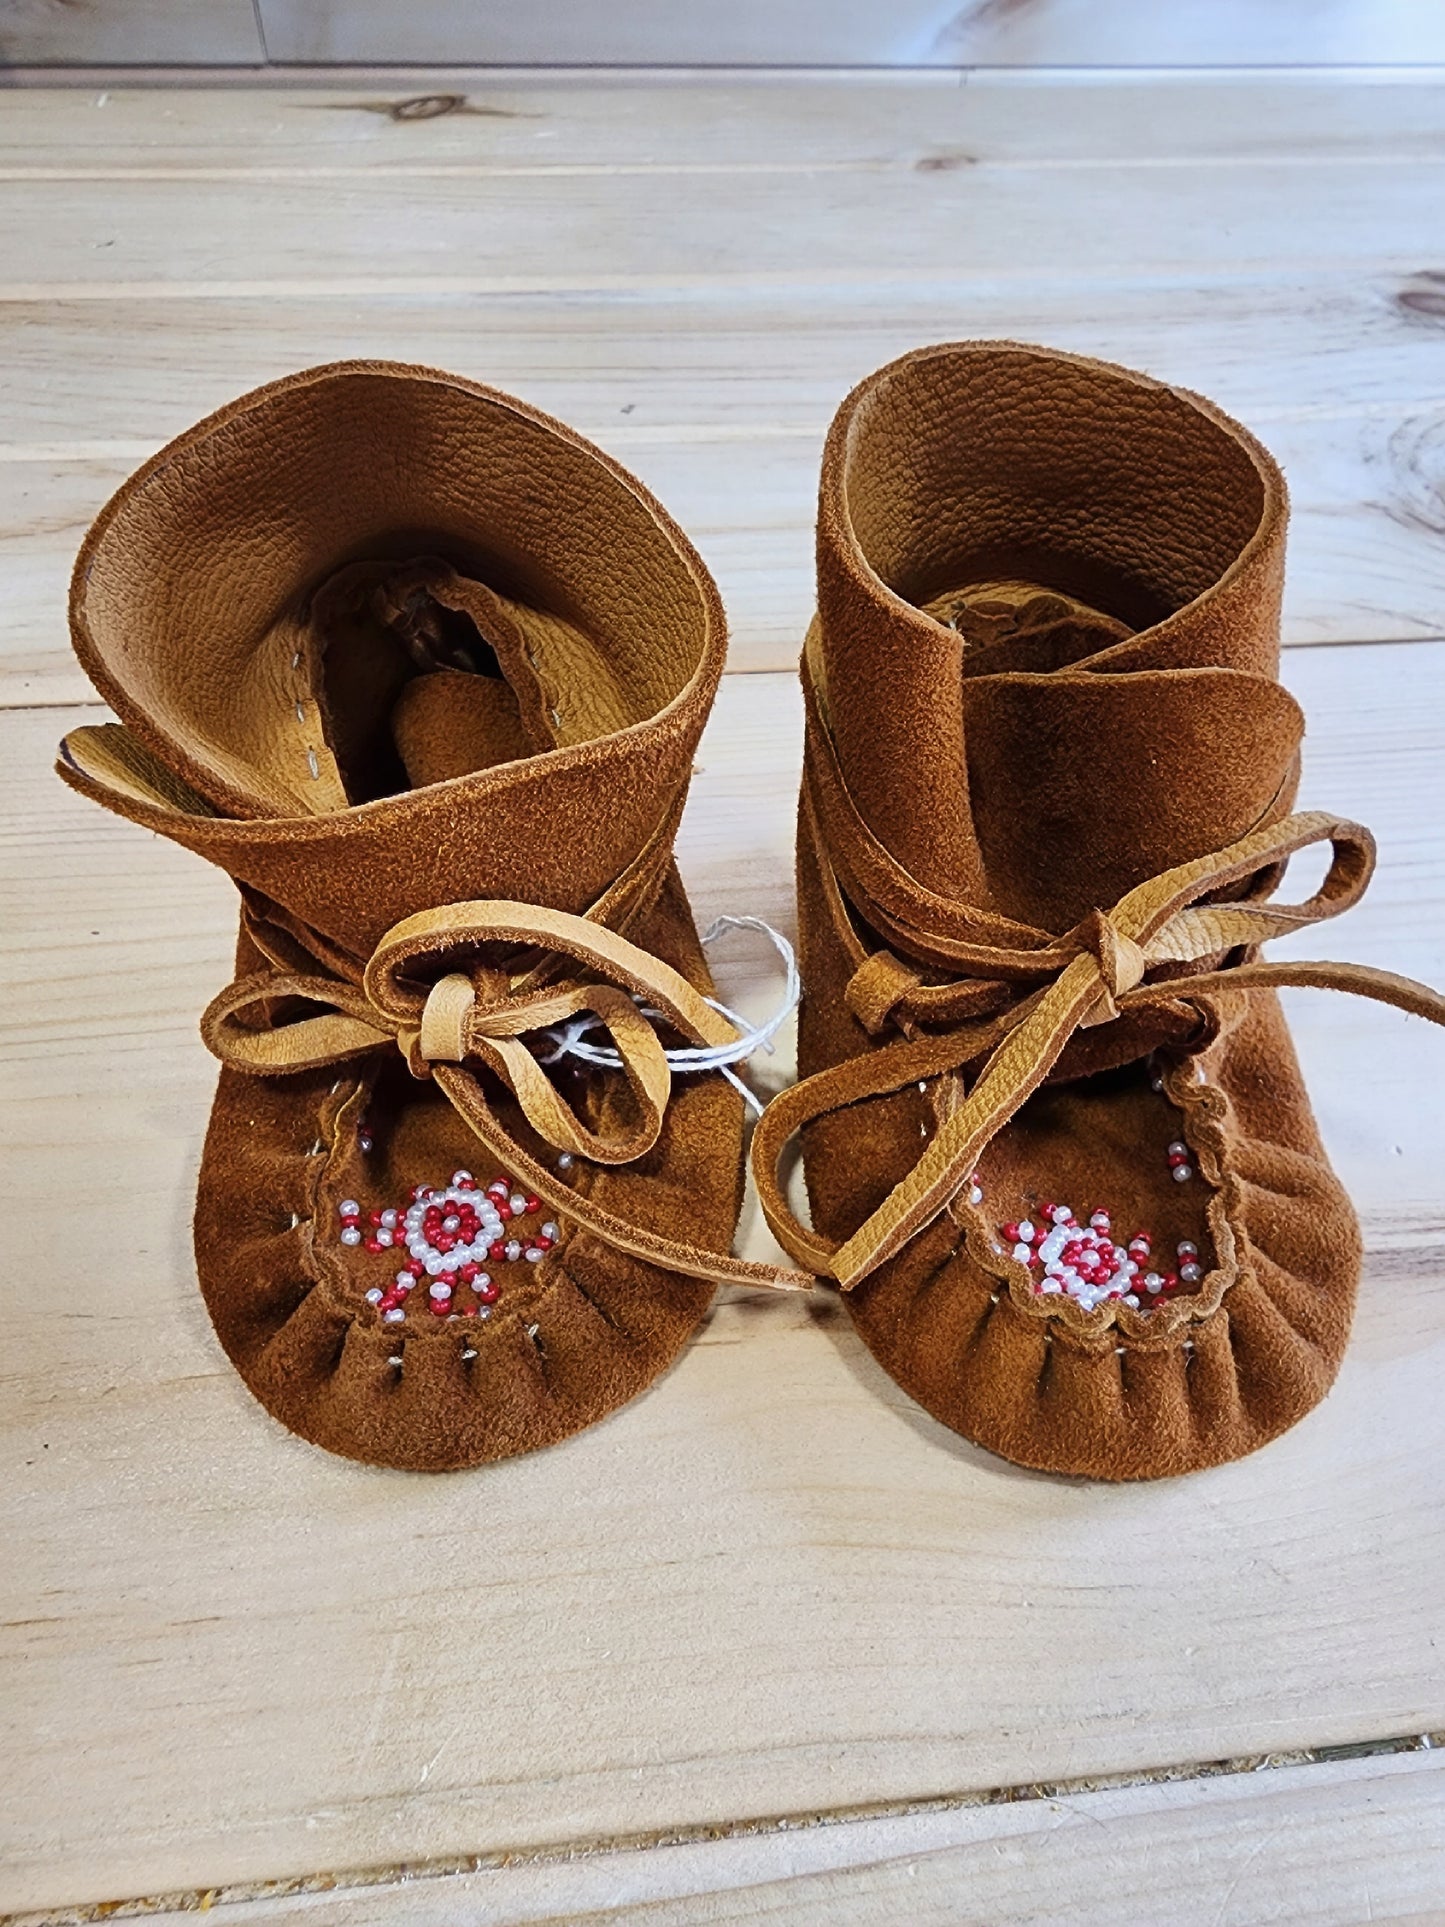 Leather Seude Moccasin Wraps - size 2 (U.S.) - with Beaded Design